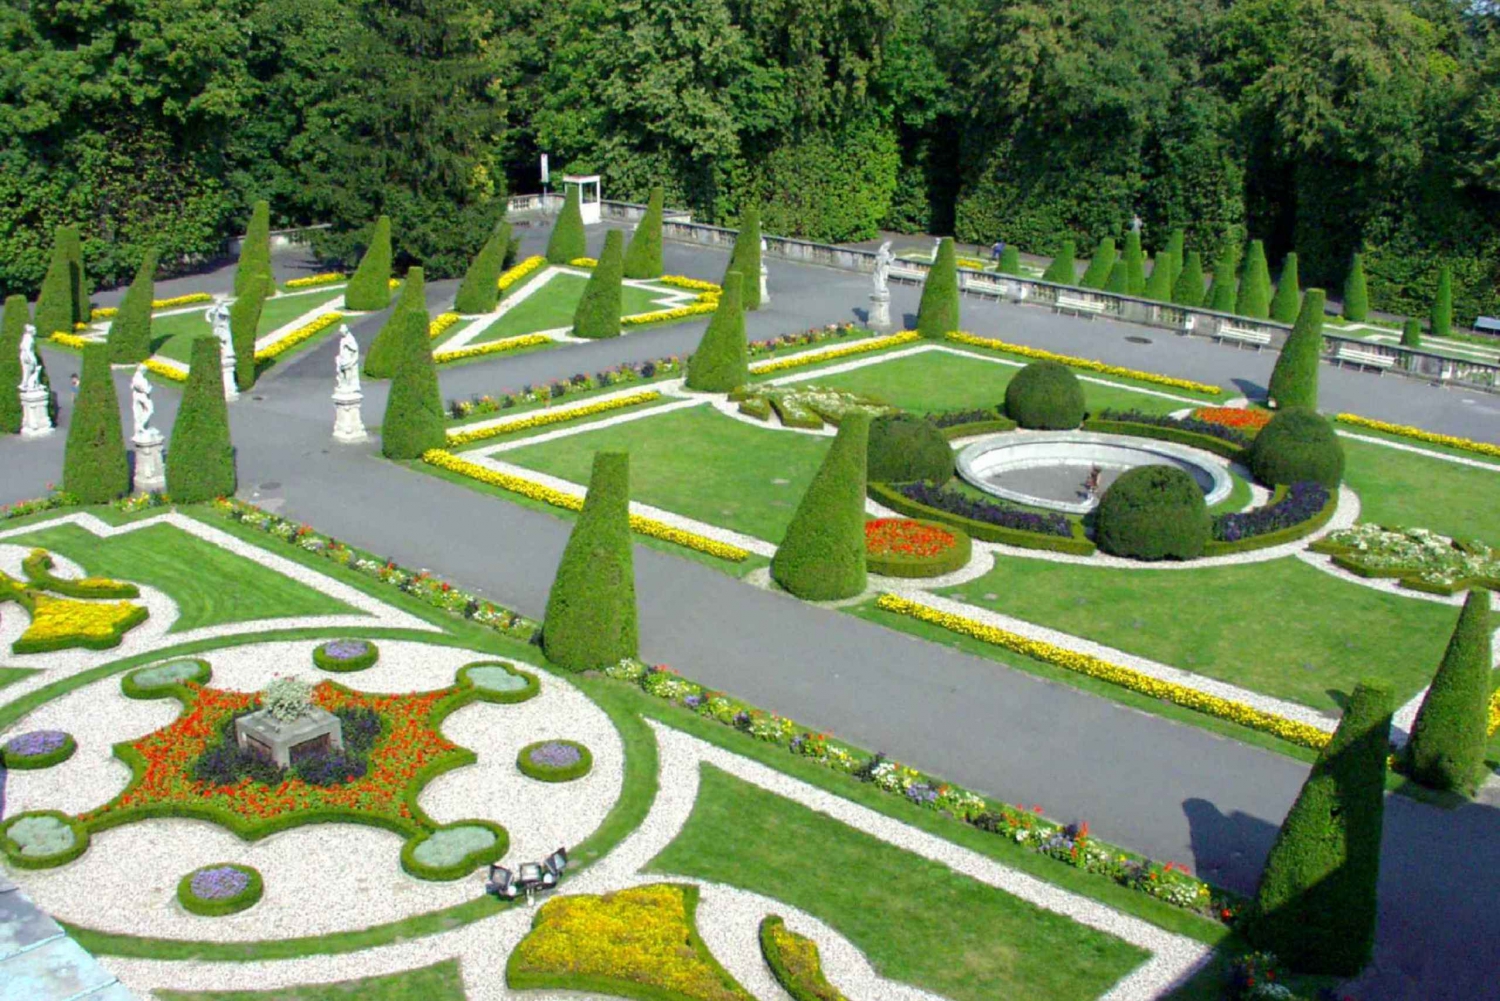 Warsaw: Guided Wilanow Palace and POLIN Tour